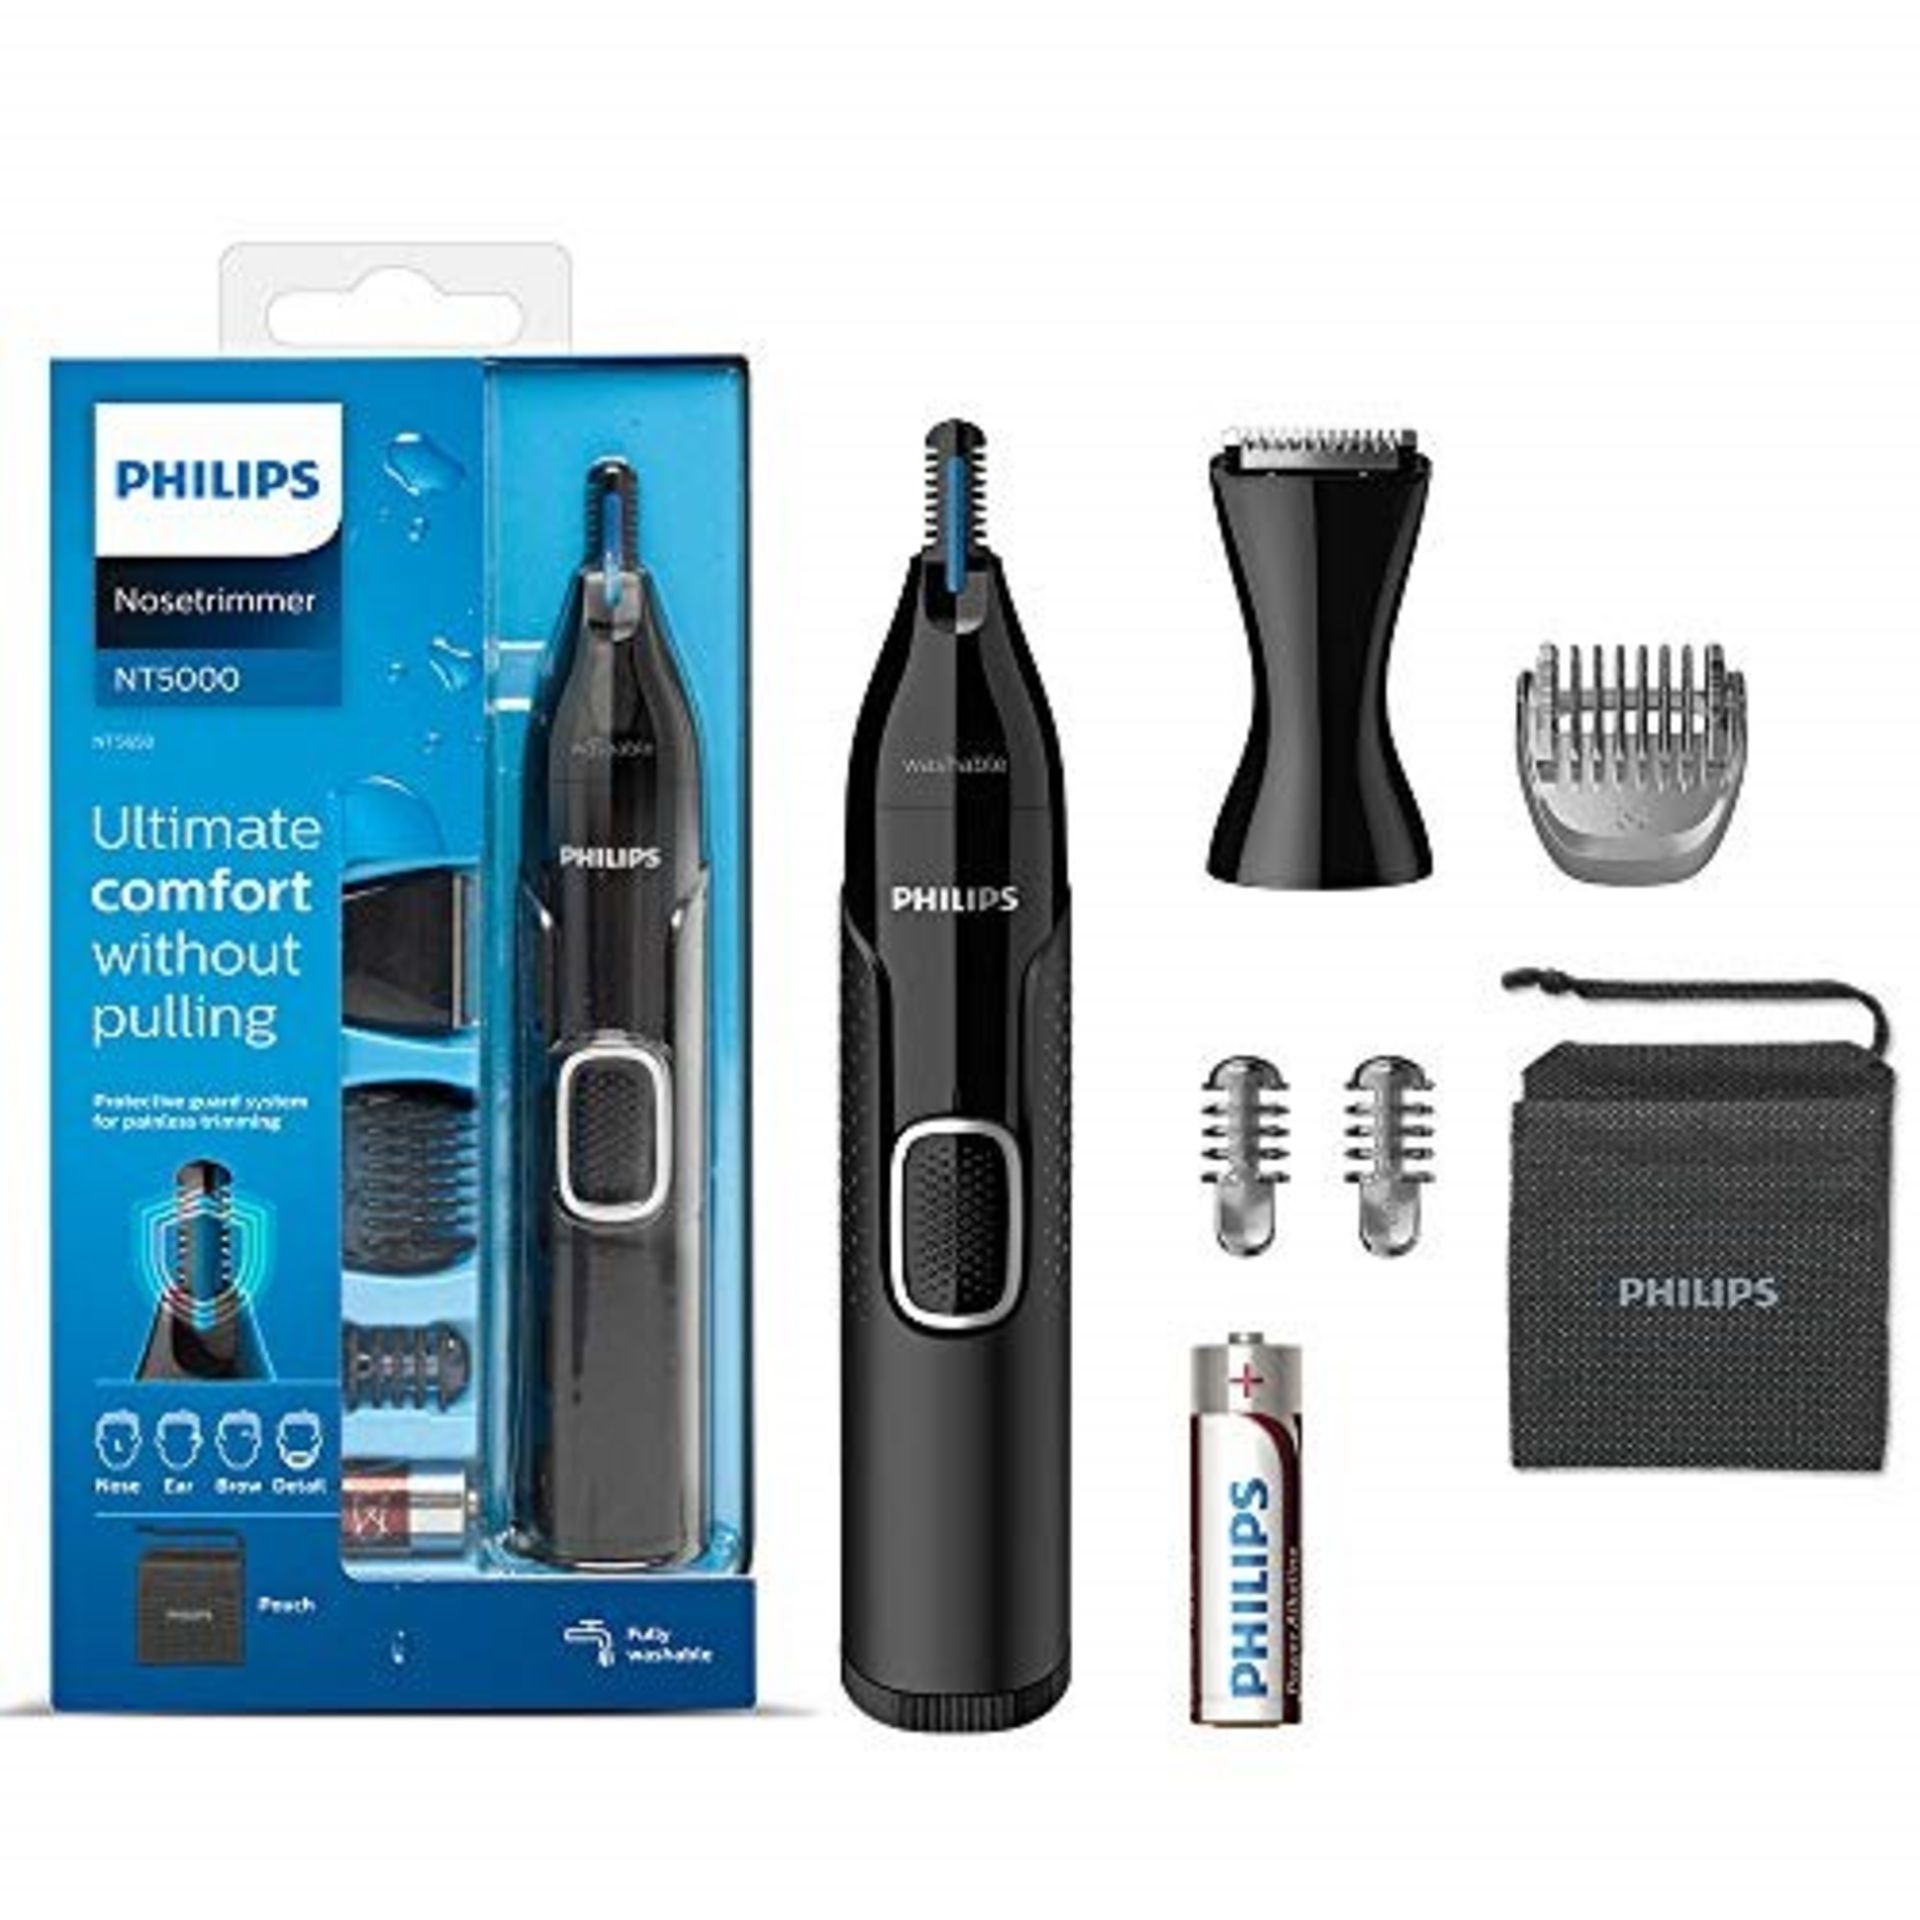 Philips Nose Hair Trimmer, Series 5000 Nose, Ear and Eyebrow Trimmer with Detail Trimm - Image 3 of 4